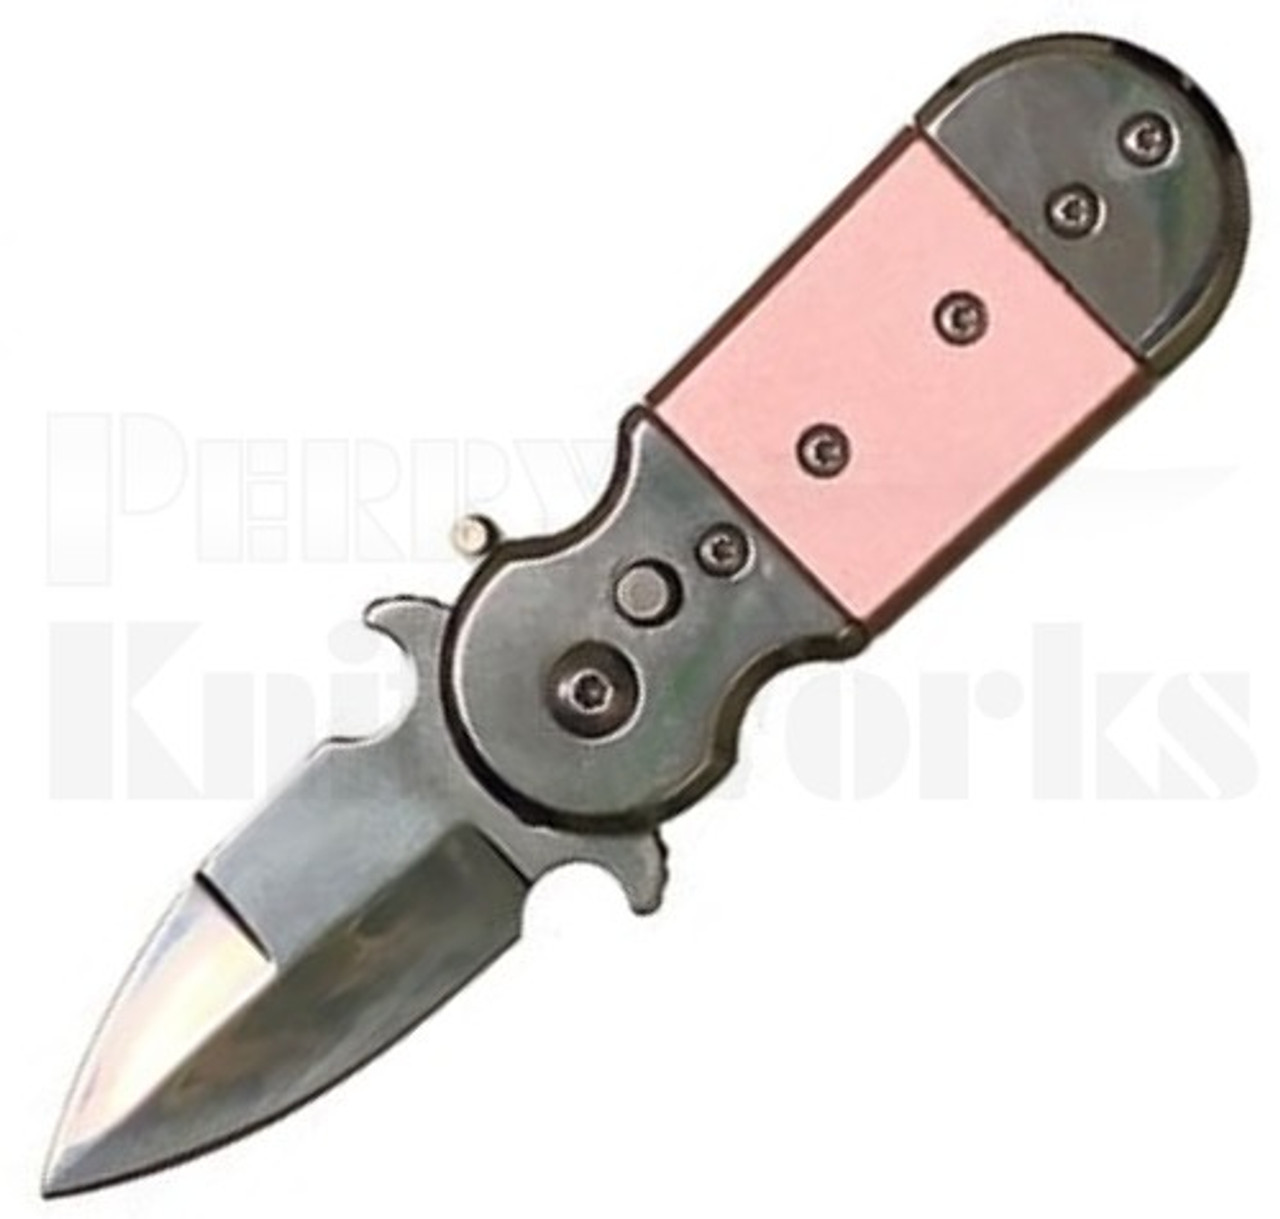 https://cdn11.bigcommerce.com/s-ar8byh/images/stencil/1280x1280/products/12133/42229/Armed-Force-Tactical-Automatic-Knife-Polish-Pink__33128.1677012592.jpg?c=2